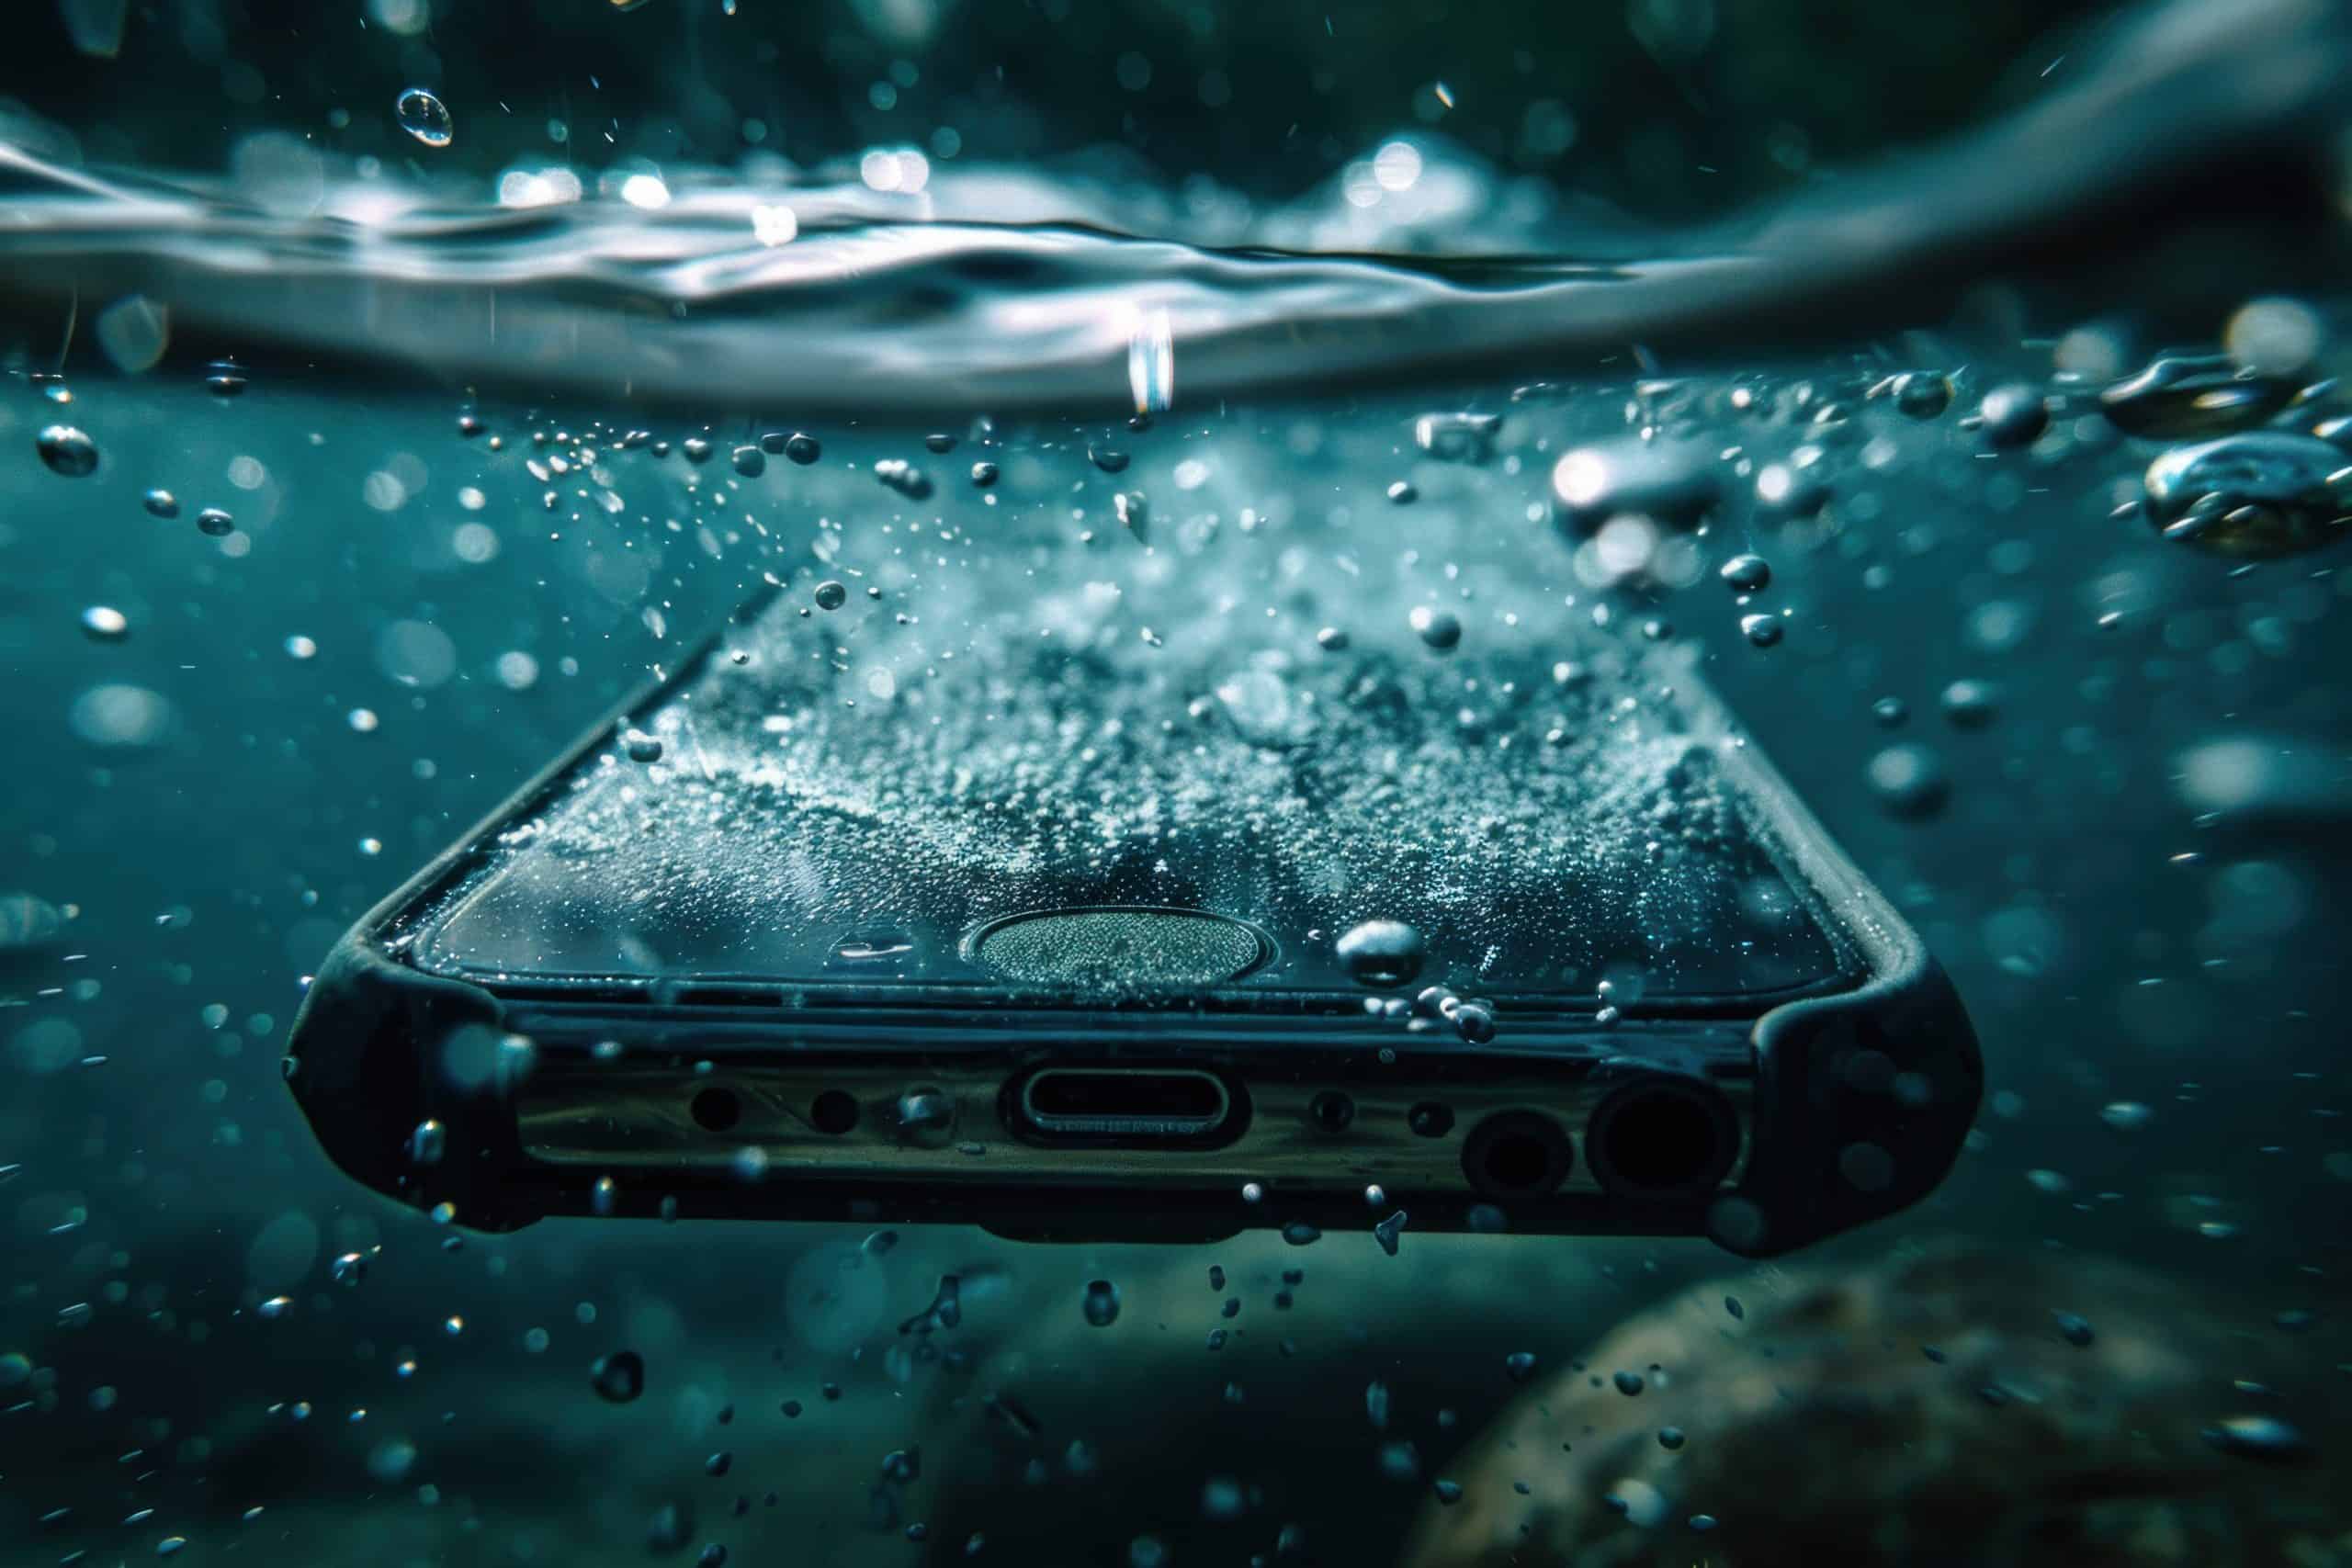 Smart iPhone underwater and suffering damage by the water, Concept for Smartphone repair and insurance